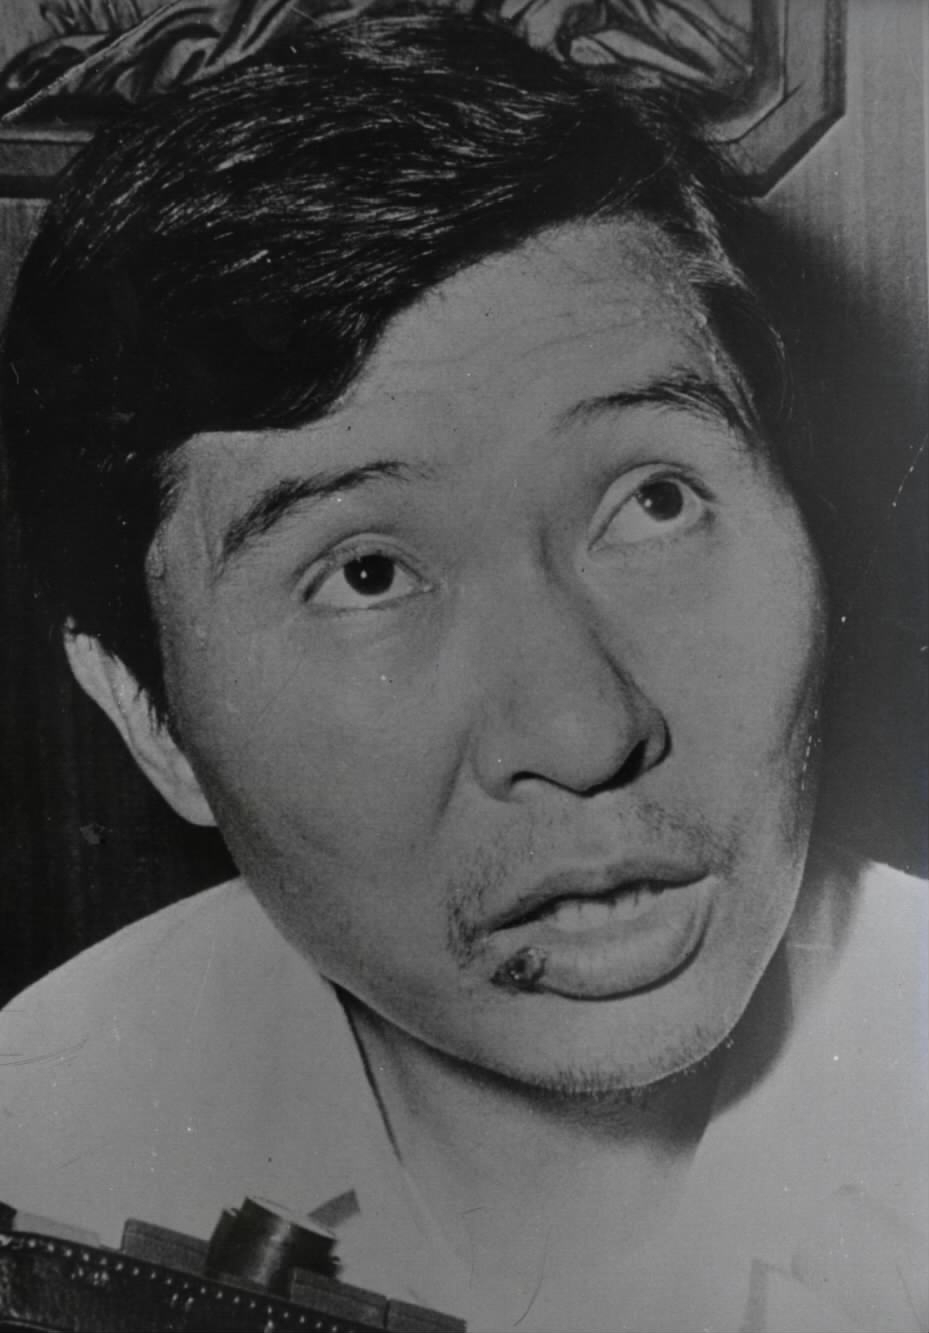 Kim, surrounded by journalists, speaks on the phone at his home in Seoul on Aug. 13, 1973, five days after his abduction in Japan. (The Korea Herald)